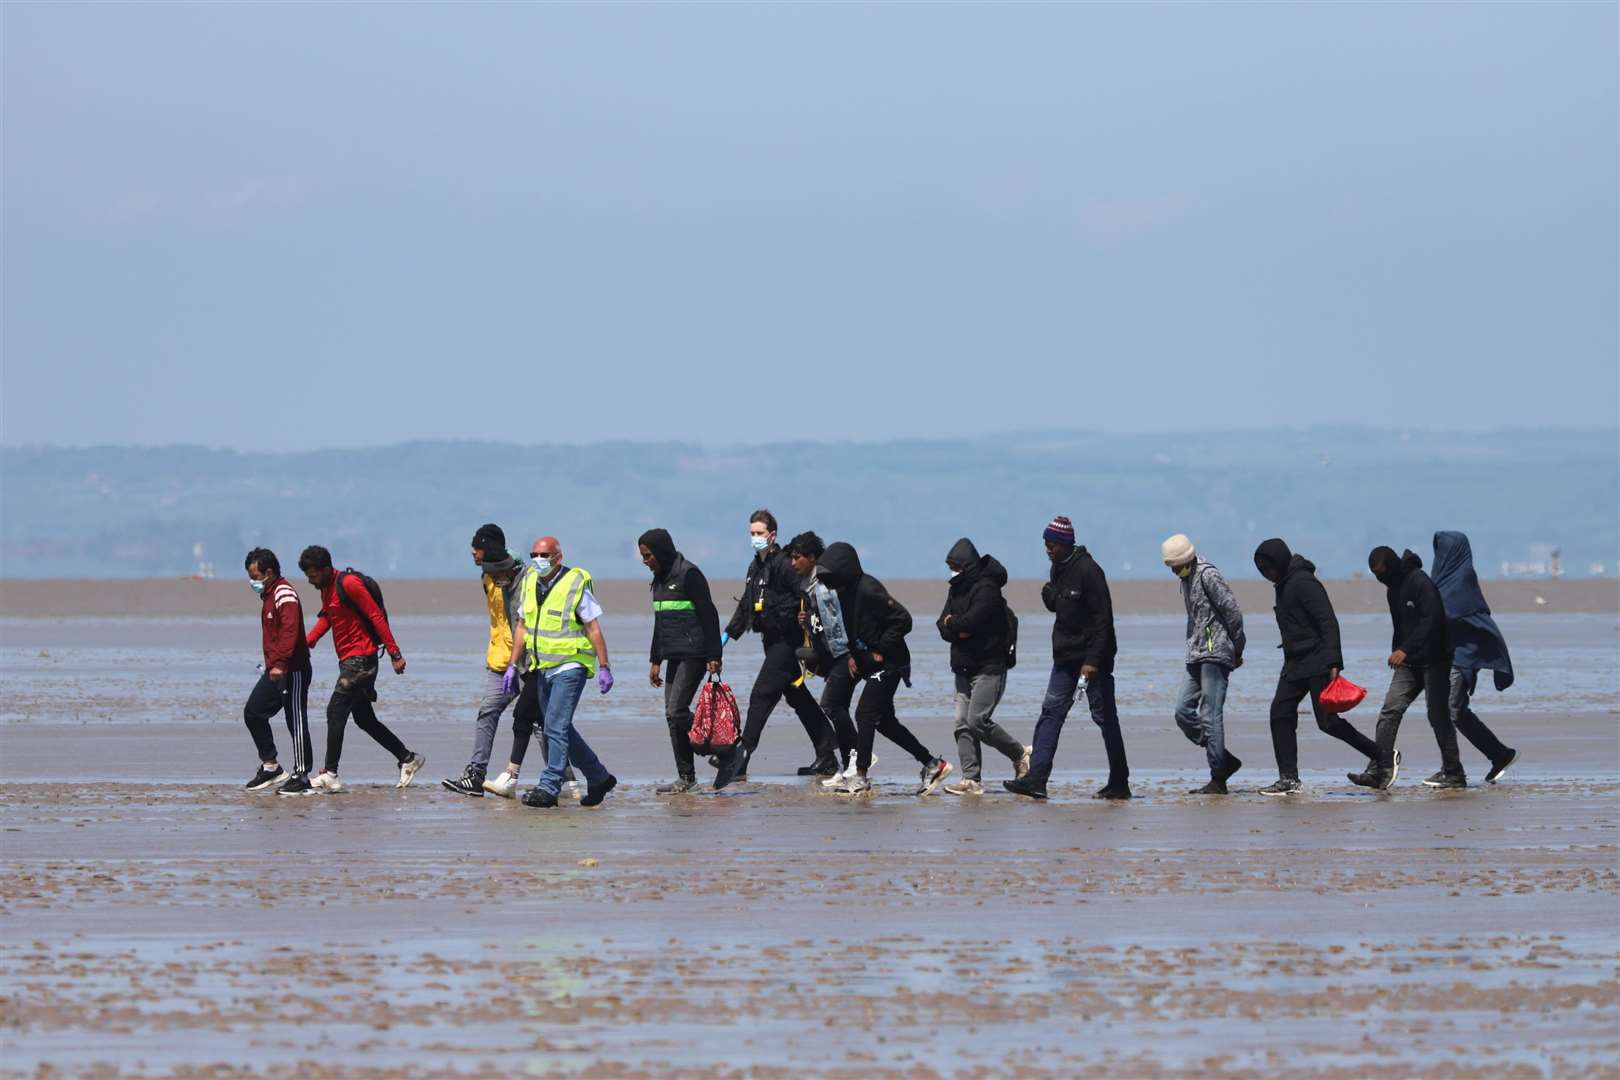 Thousands of asylum seekers have landed on Britain's coasts this year